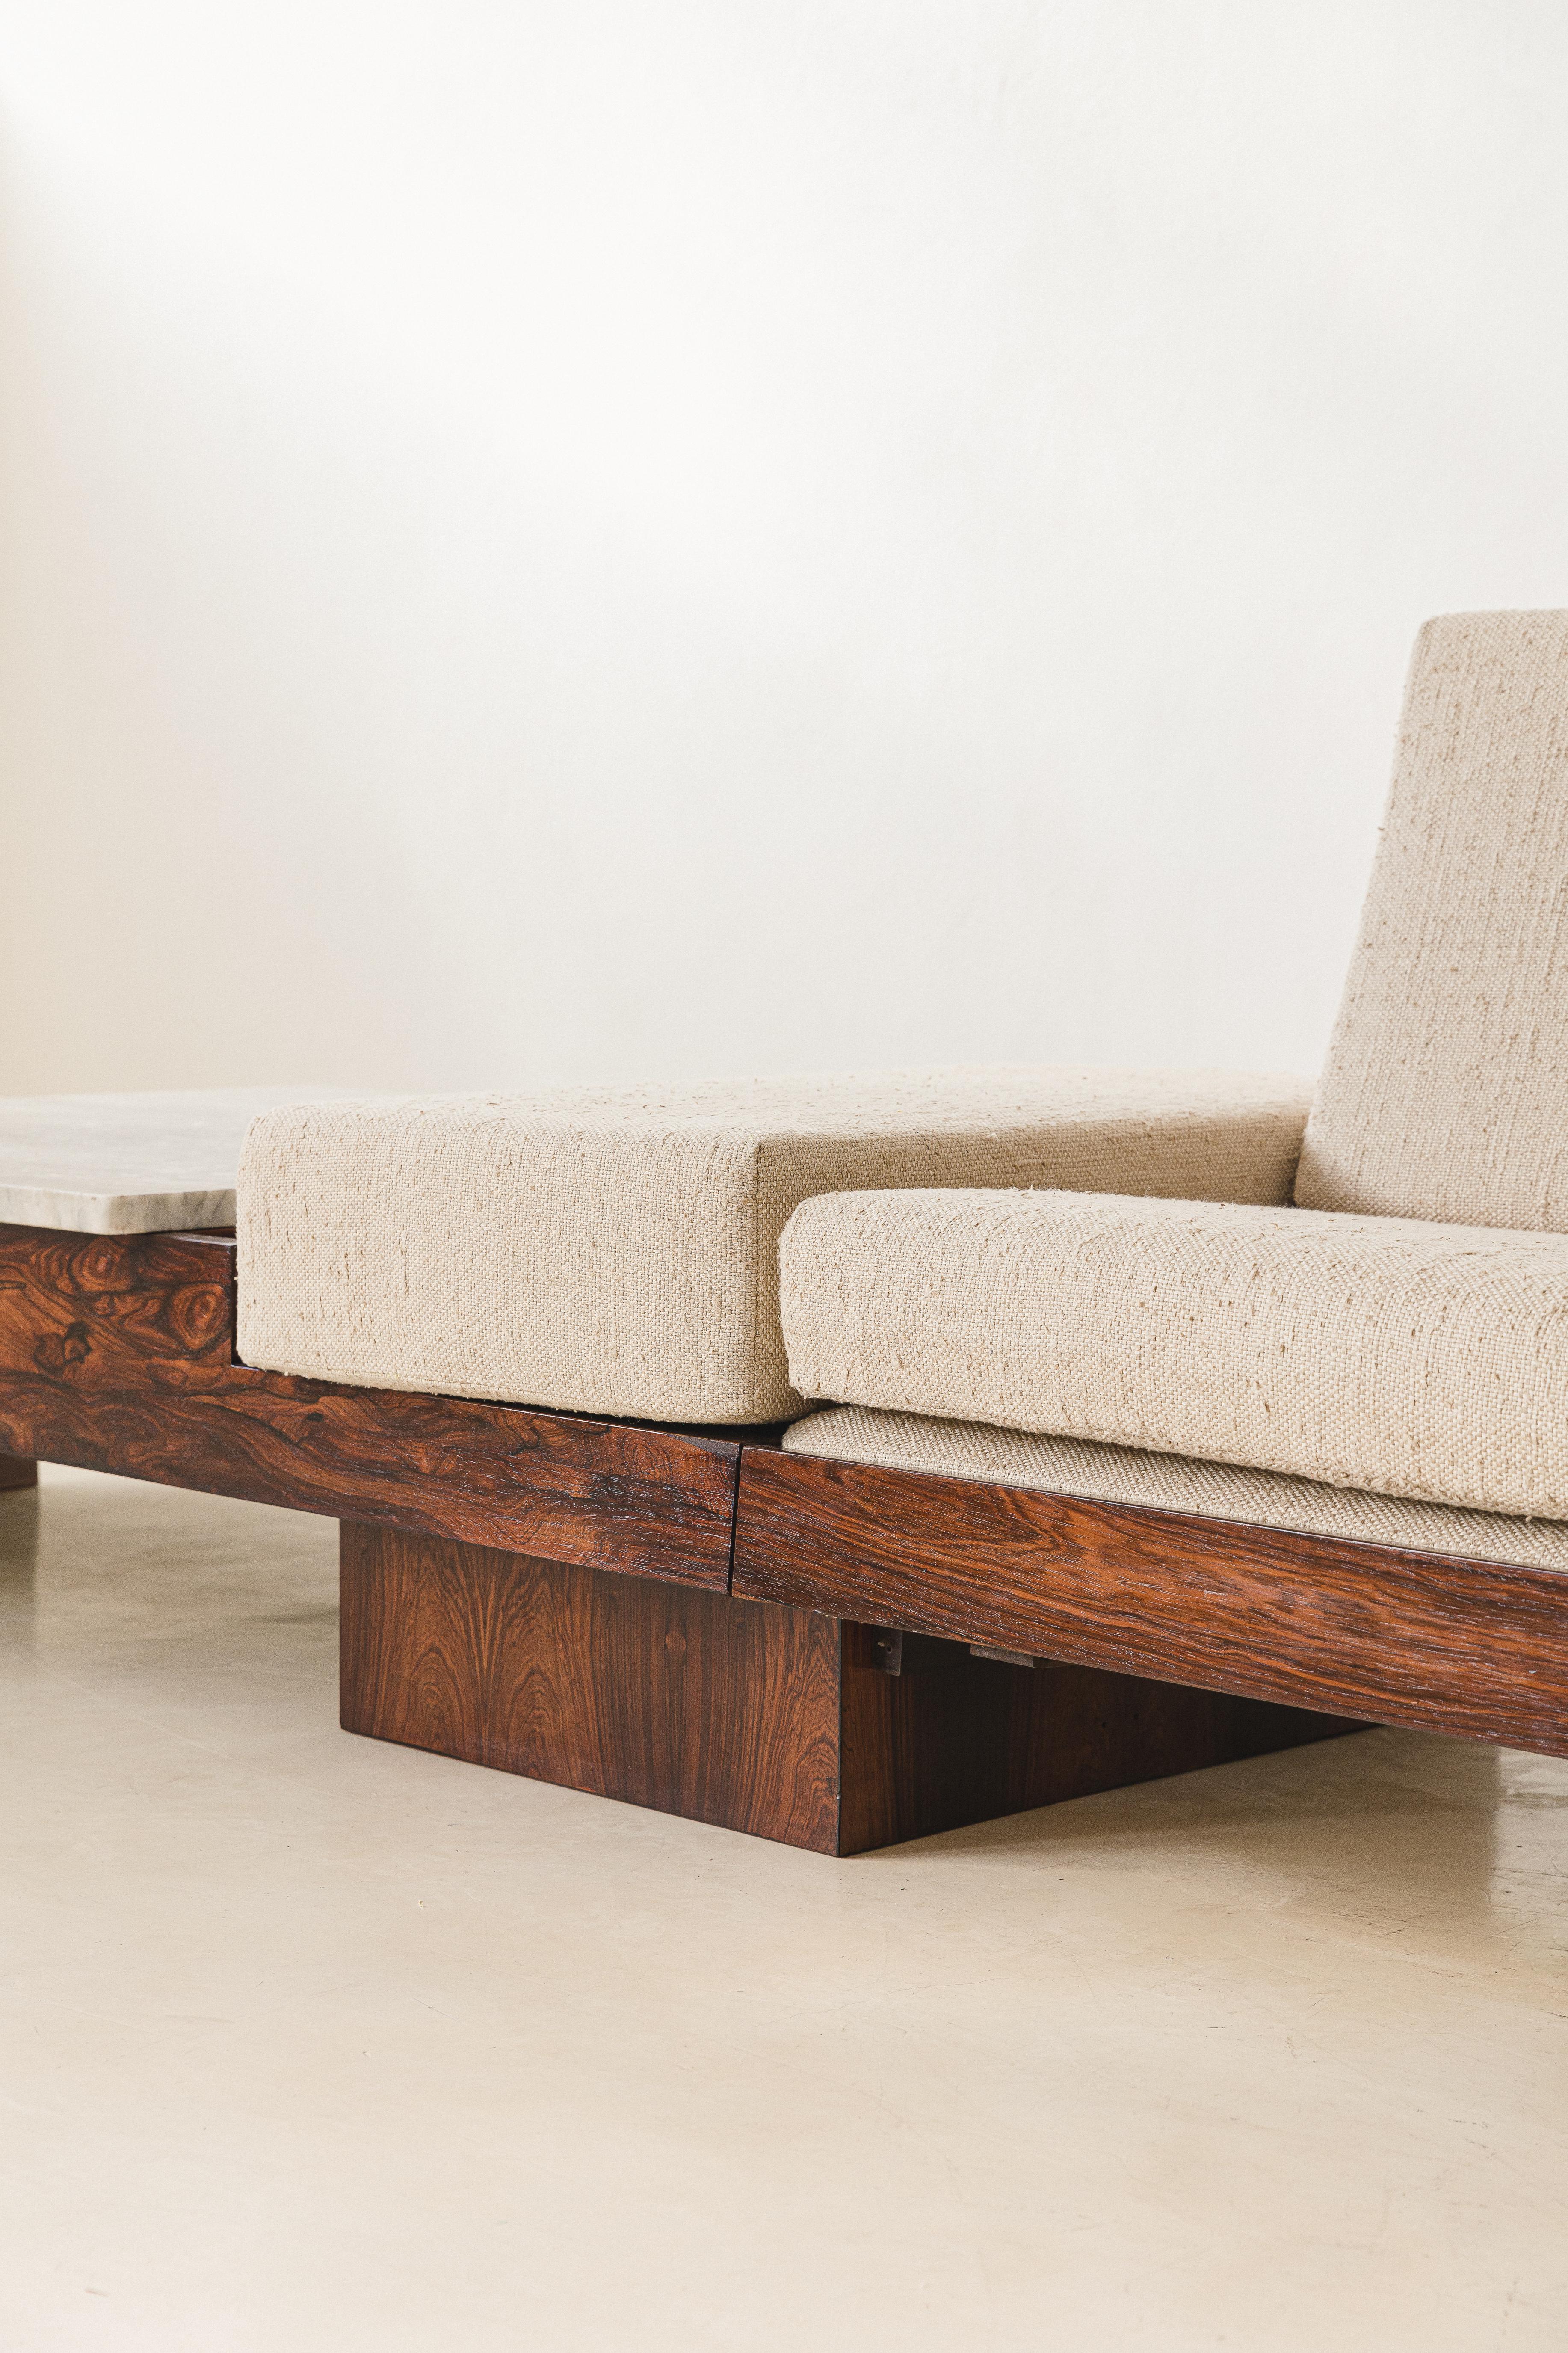 Mid-20th Century Midcentury Brazilian Sofa Design by Joaquim Tenreiro, Rosewood and Marble, 1960s For Sale